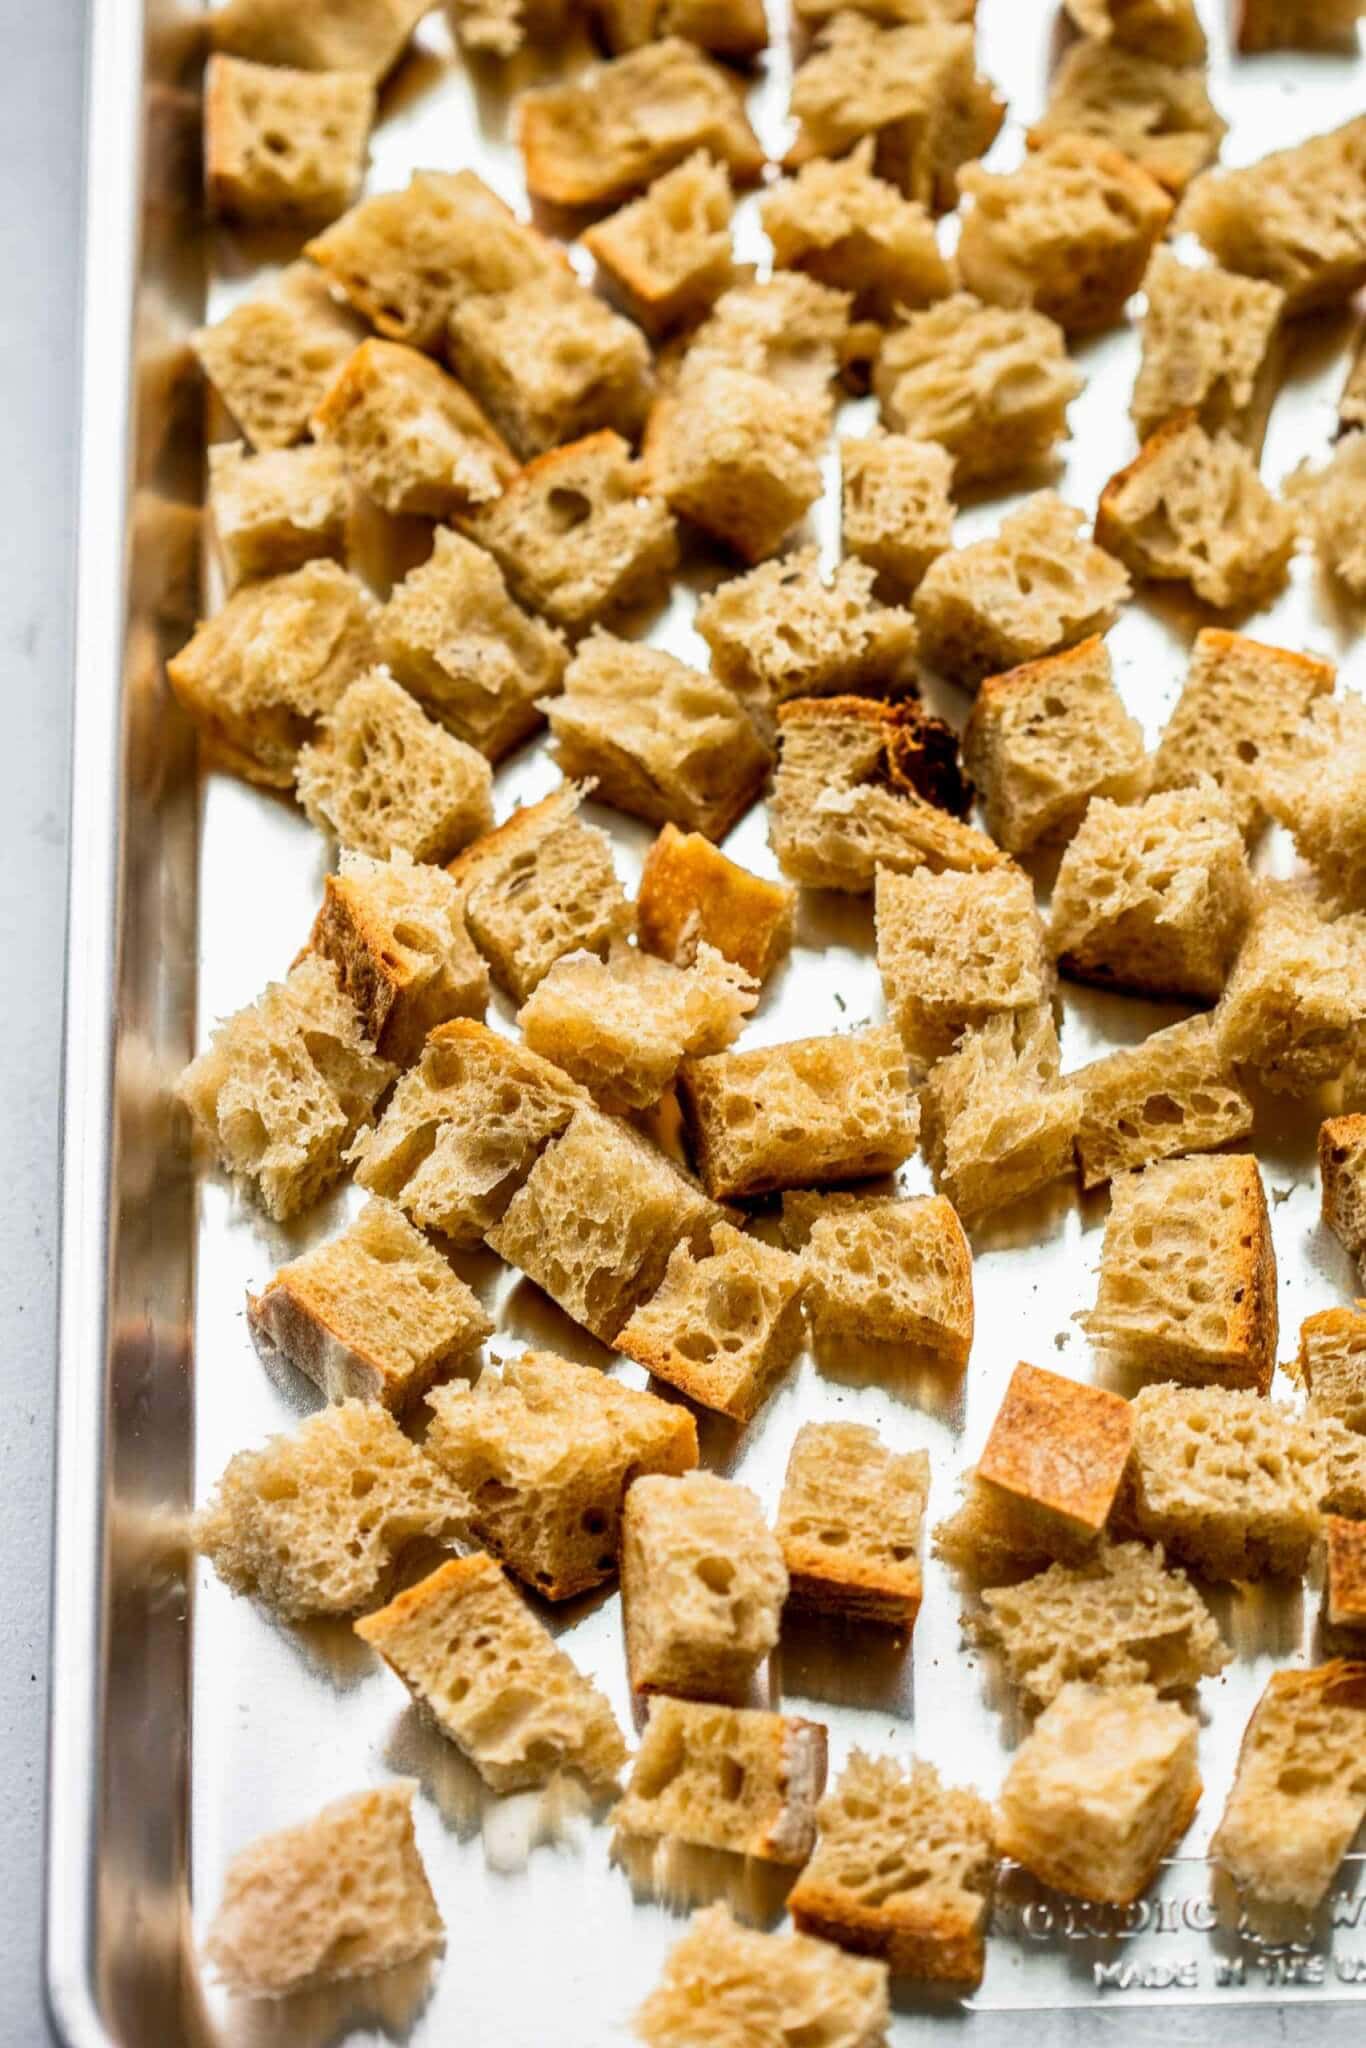 Cubes of bread on baking sheet before going in oven.